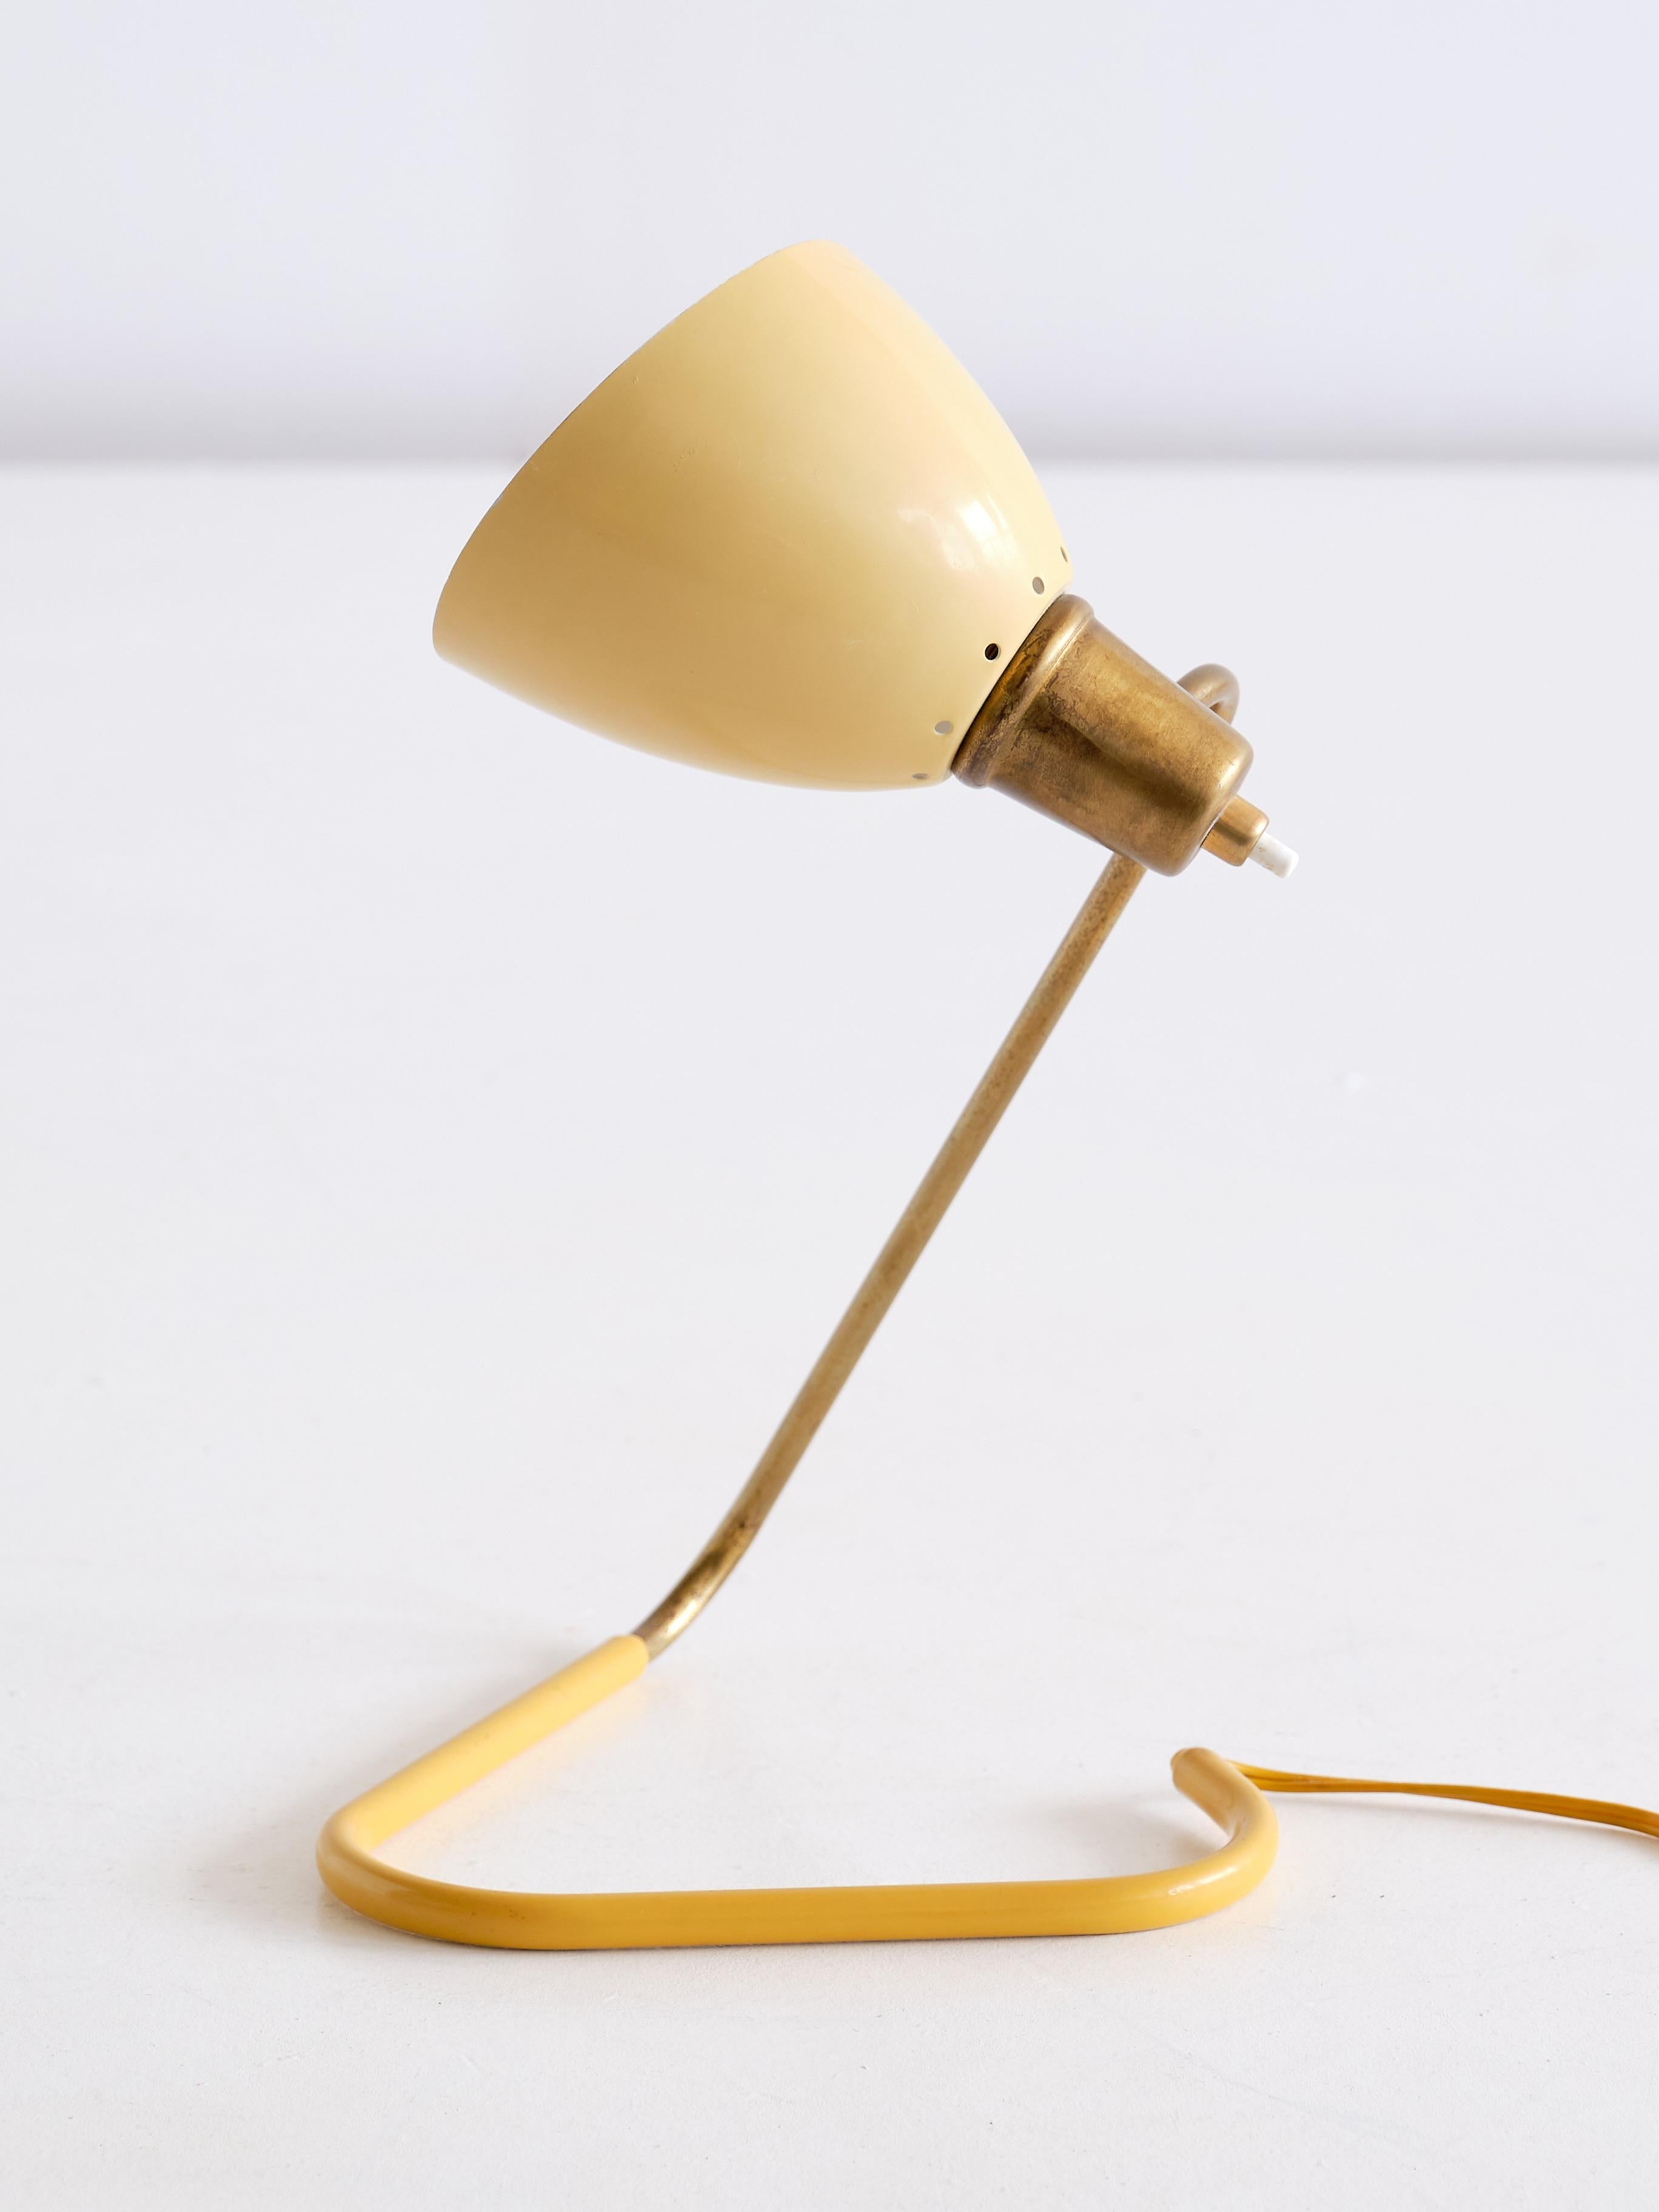 Metal Robert Caillat Table Lamp with Yellow Adjustable Shade, France, 1950s For Sale